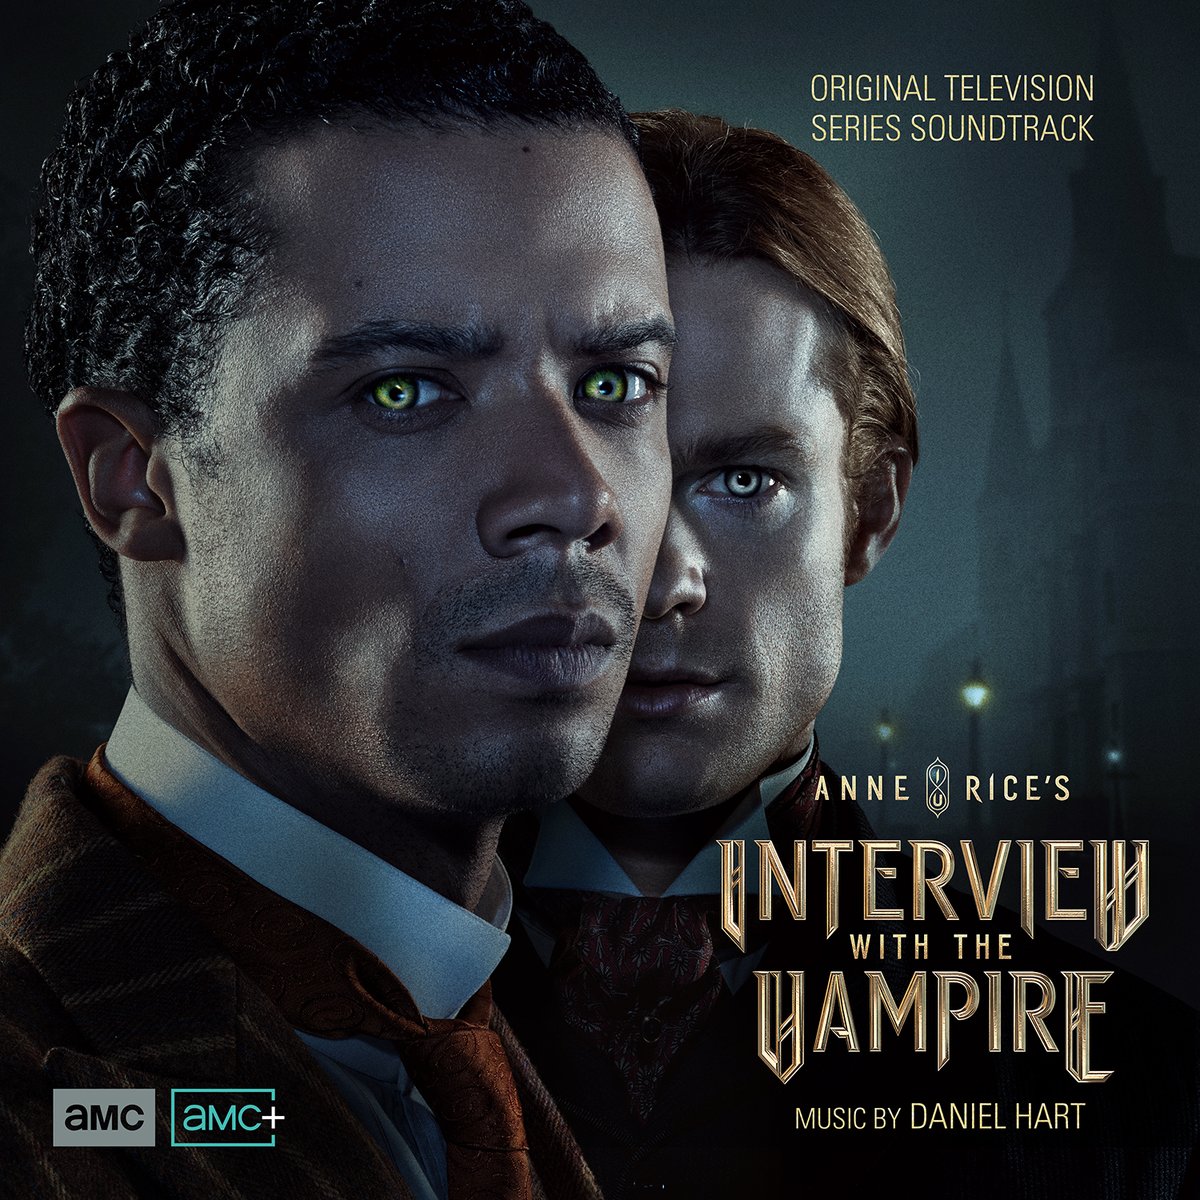 Who wants to live forever? 🧛🏼 @danielmwenda's hauntingly beautiful soundtrack for #InterviewWithTheVampire is out today – featuring fan favorite 'Overture,' an original vocal song performed by actor Sam Reid, and many more. Listen now → soundtracks.lnk.to/interview